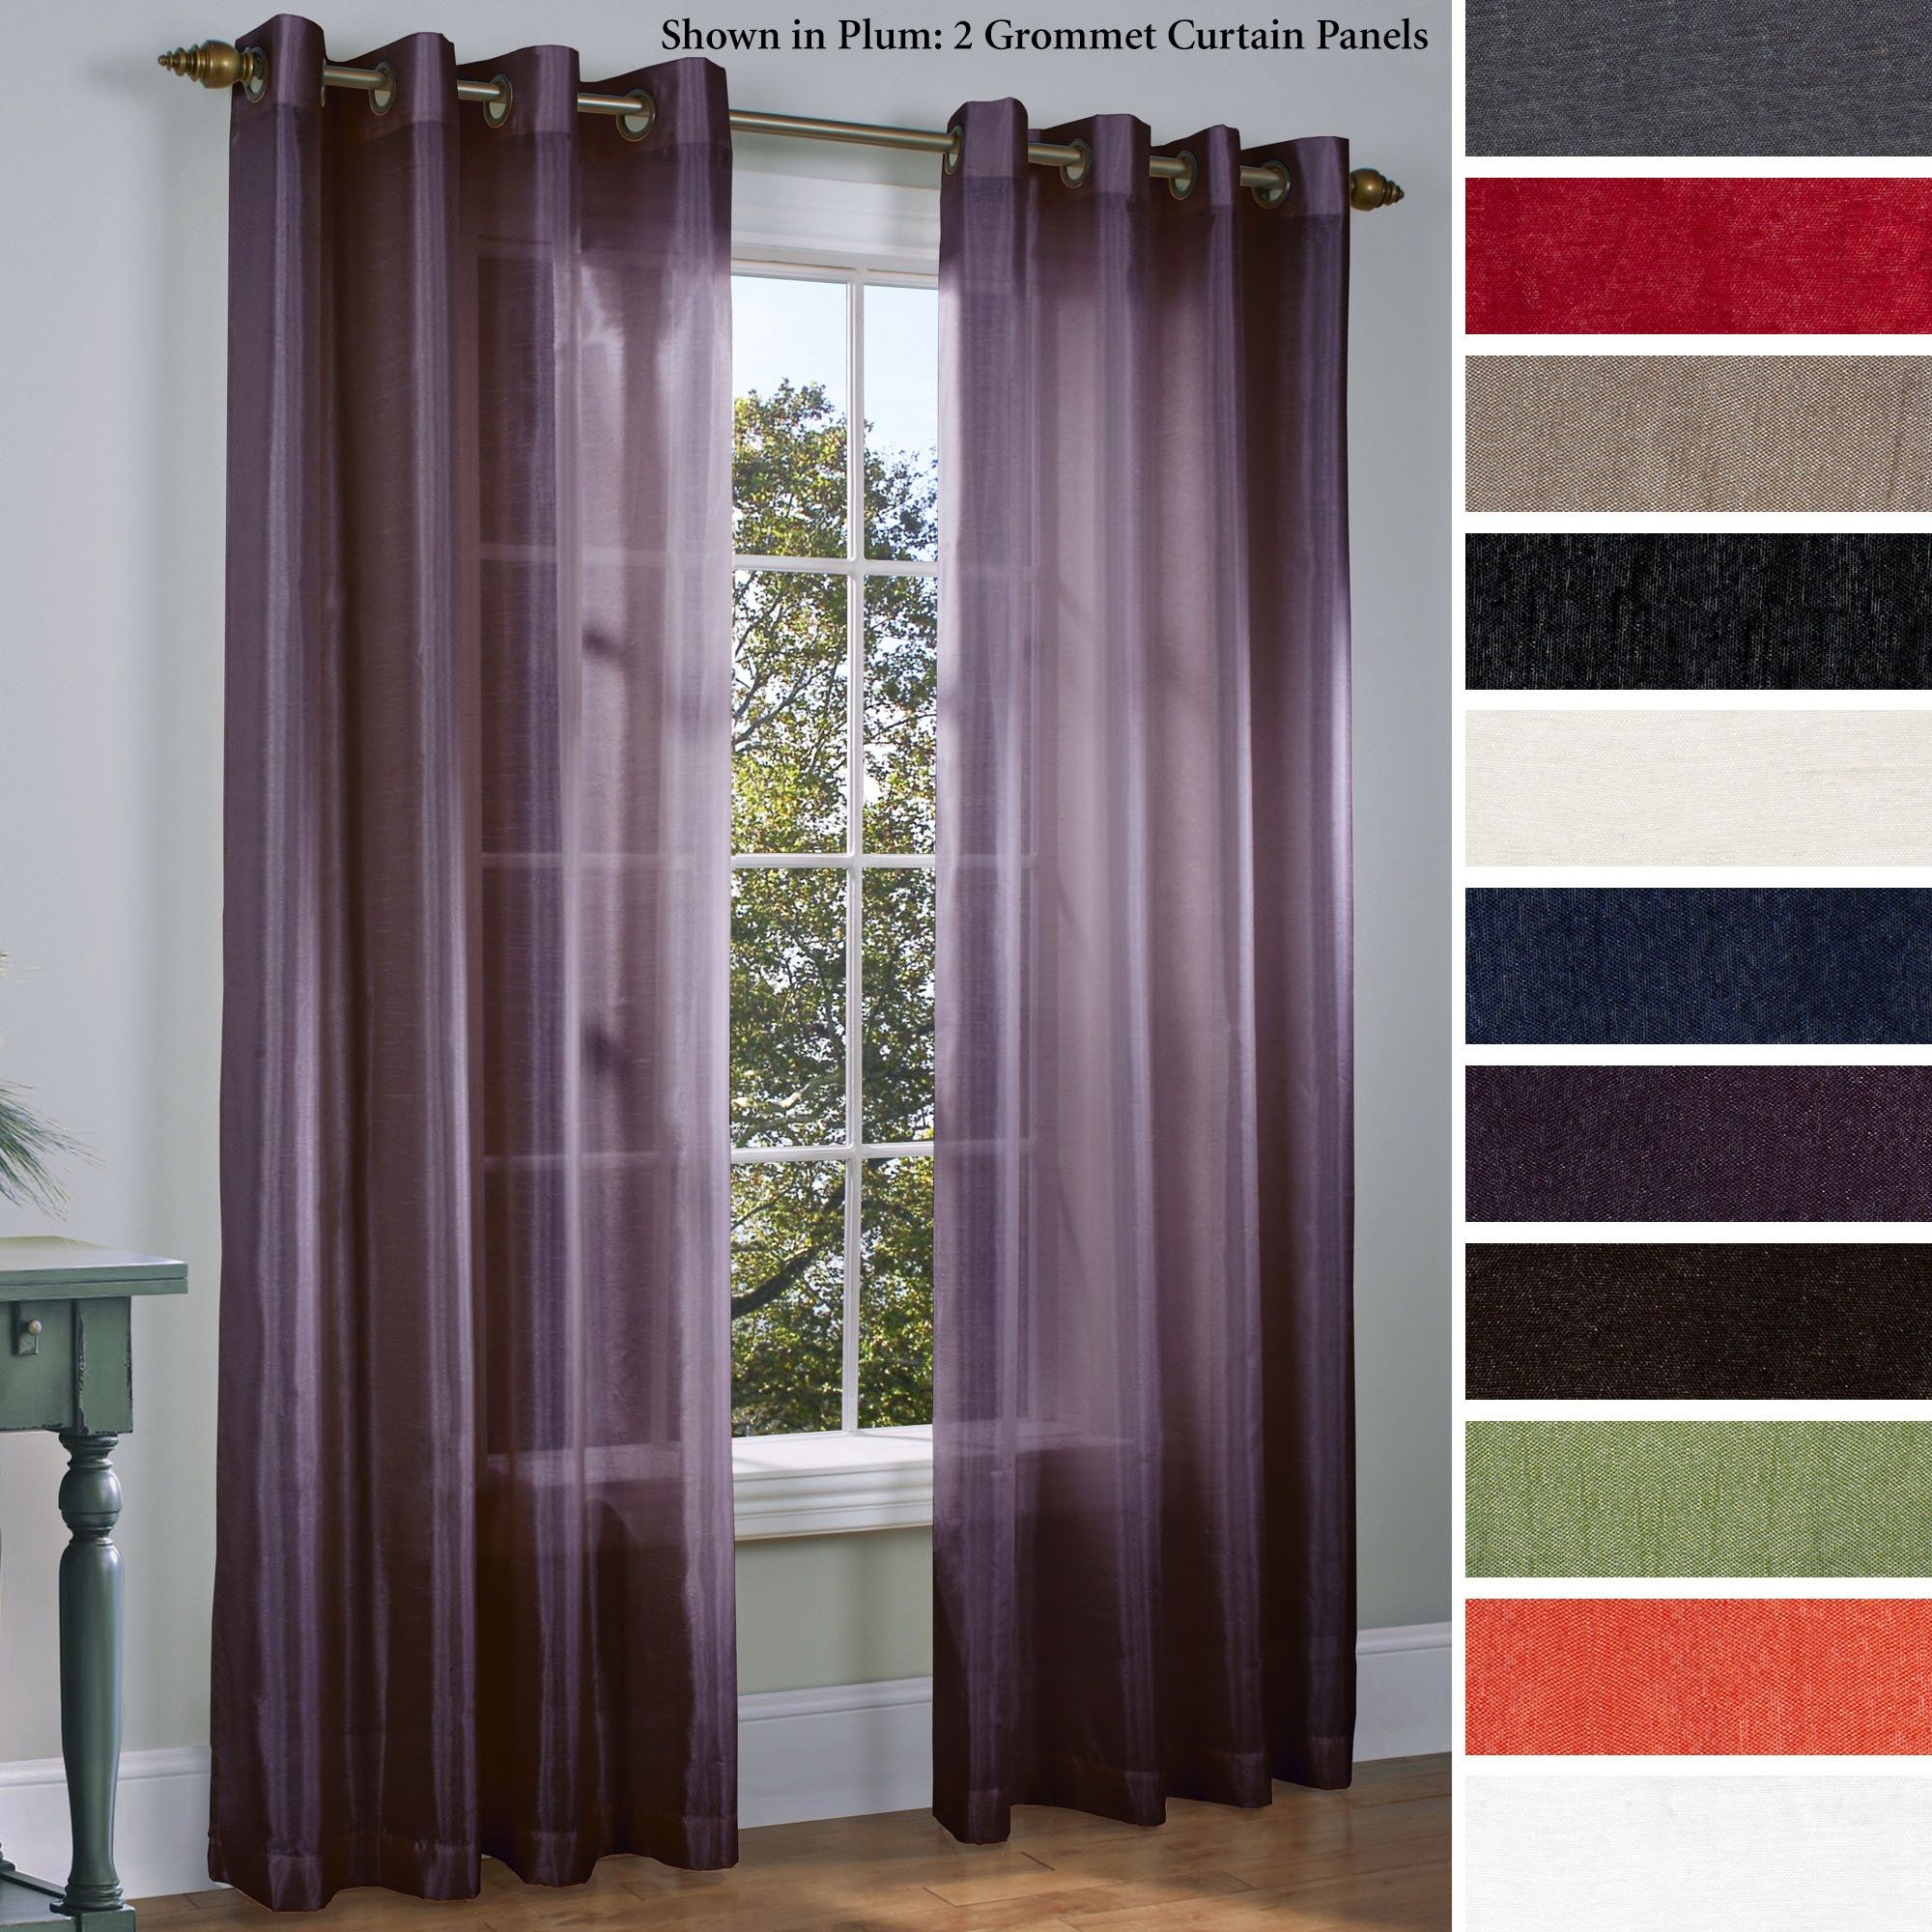 Decor Semi Sheer Curtains For Cute Interior Home Decor Ideas In Sheer Grommet Curtain Panels (View 2 of 25)